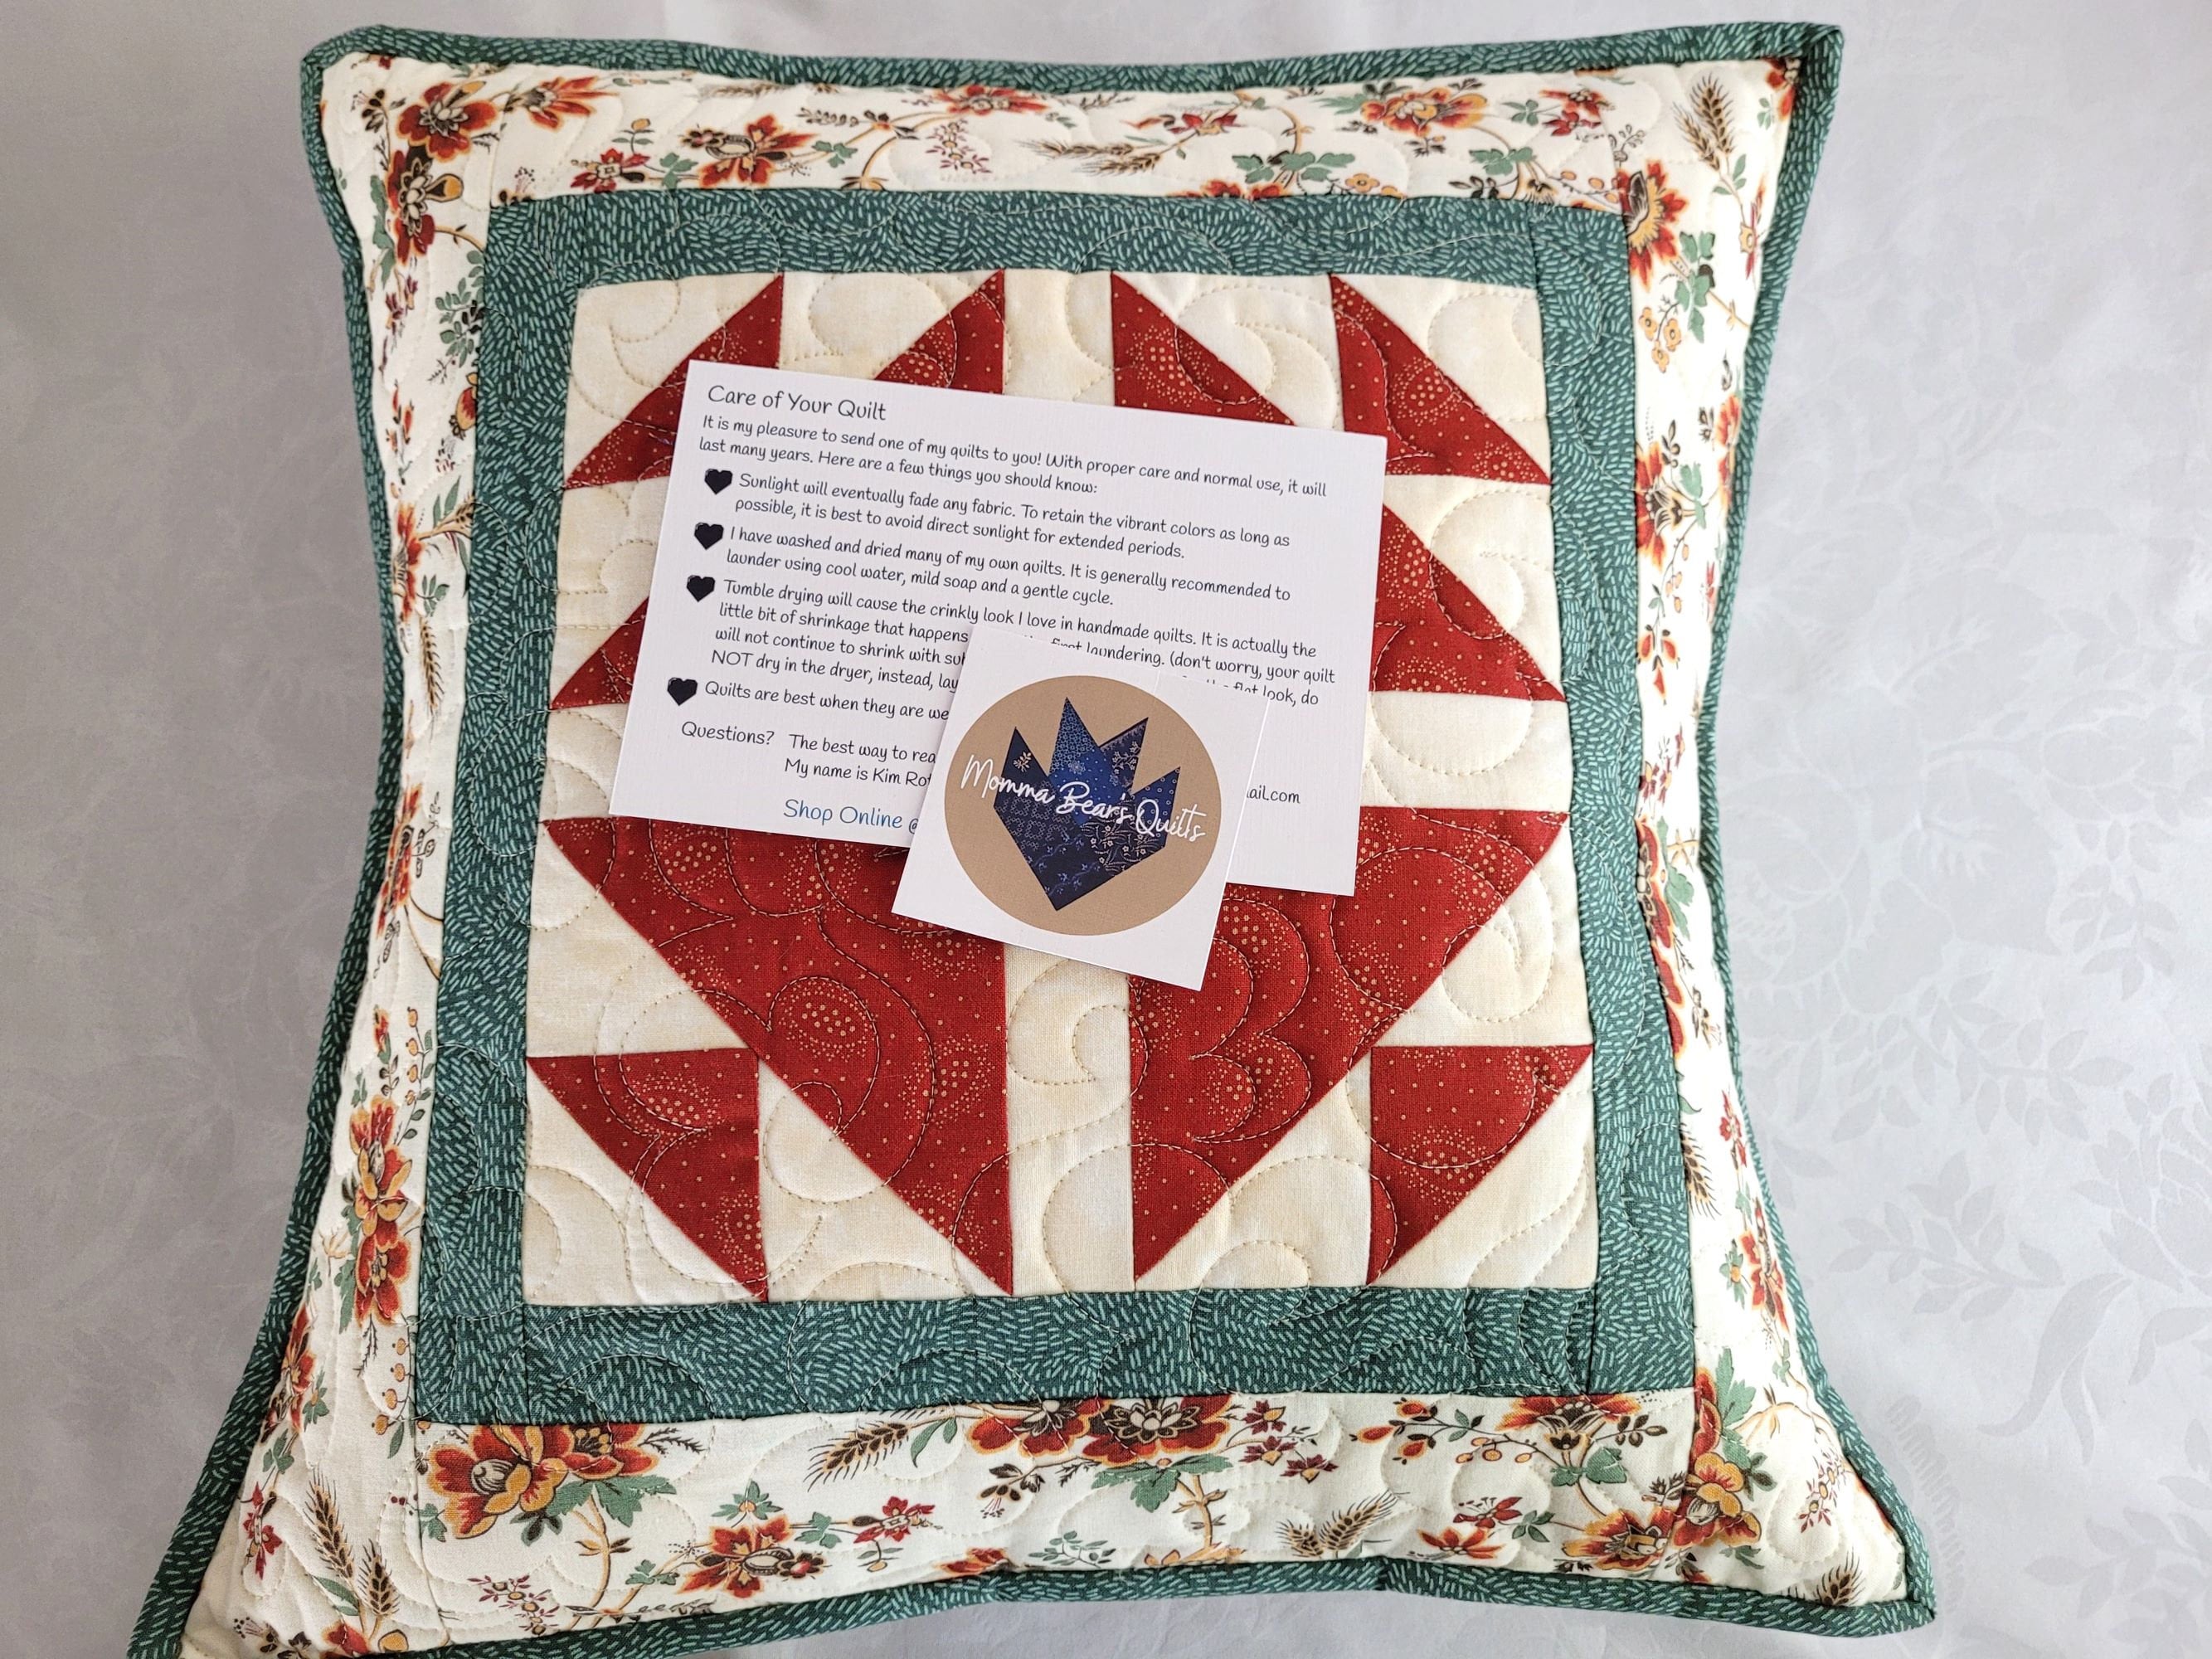 quilted pillow with care instructions